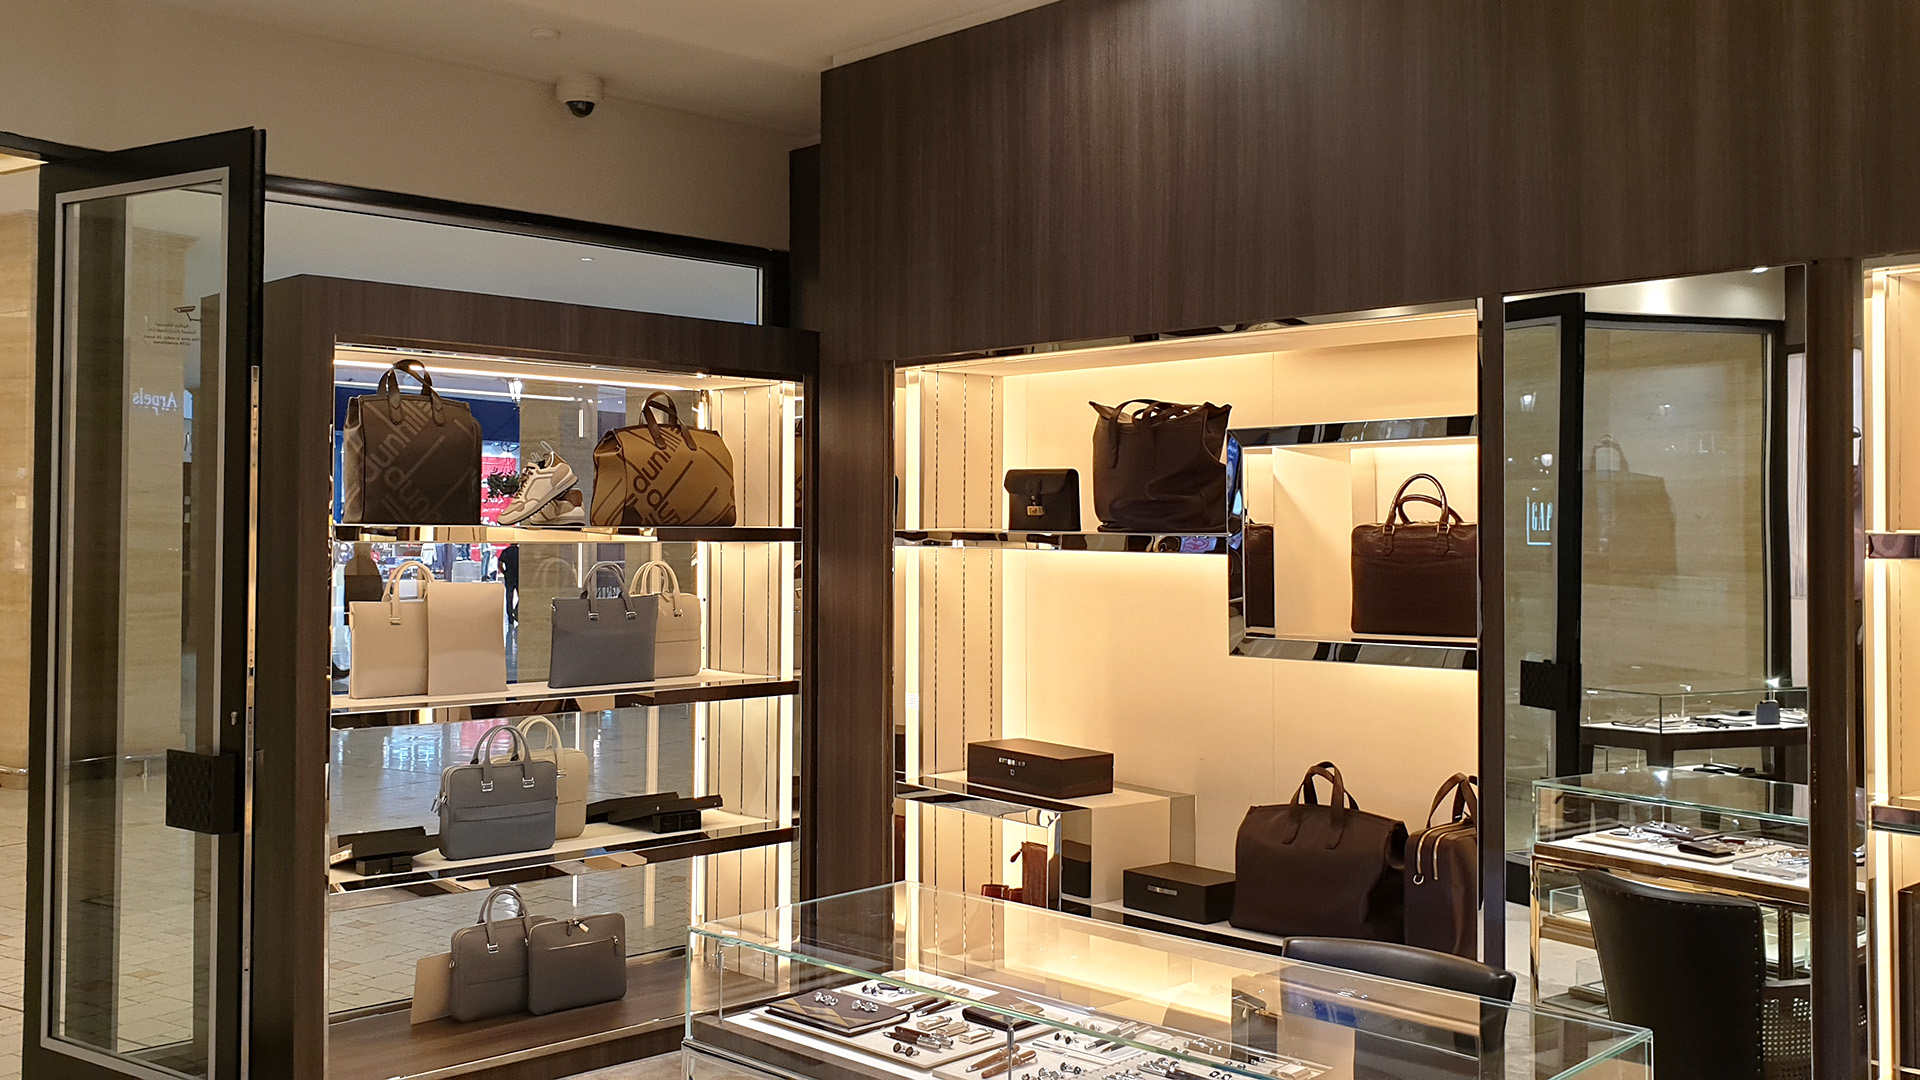 Refurbished Interior for Dunhill in Villagio using 3M DiNOC - implemented by ME Visual, Qatar